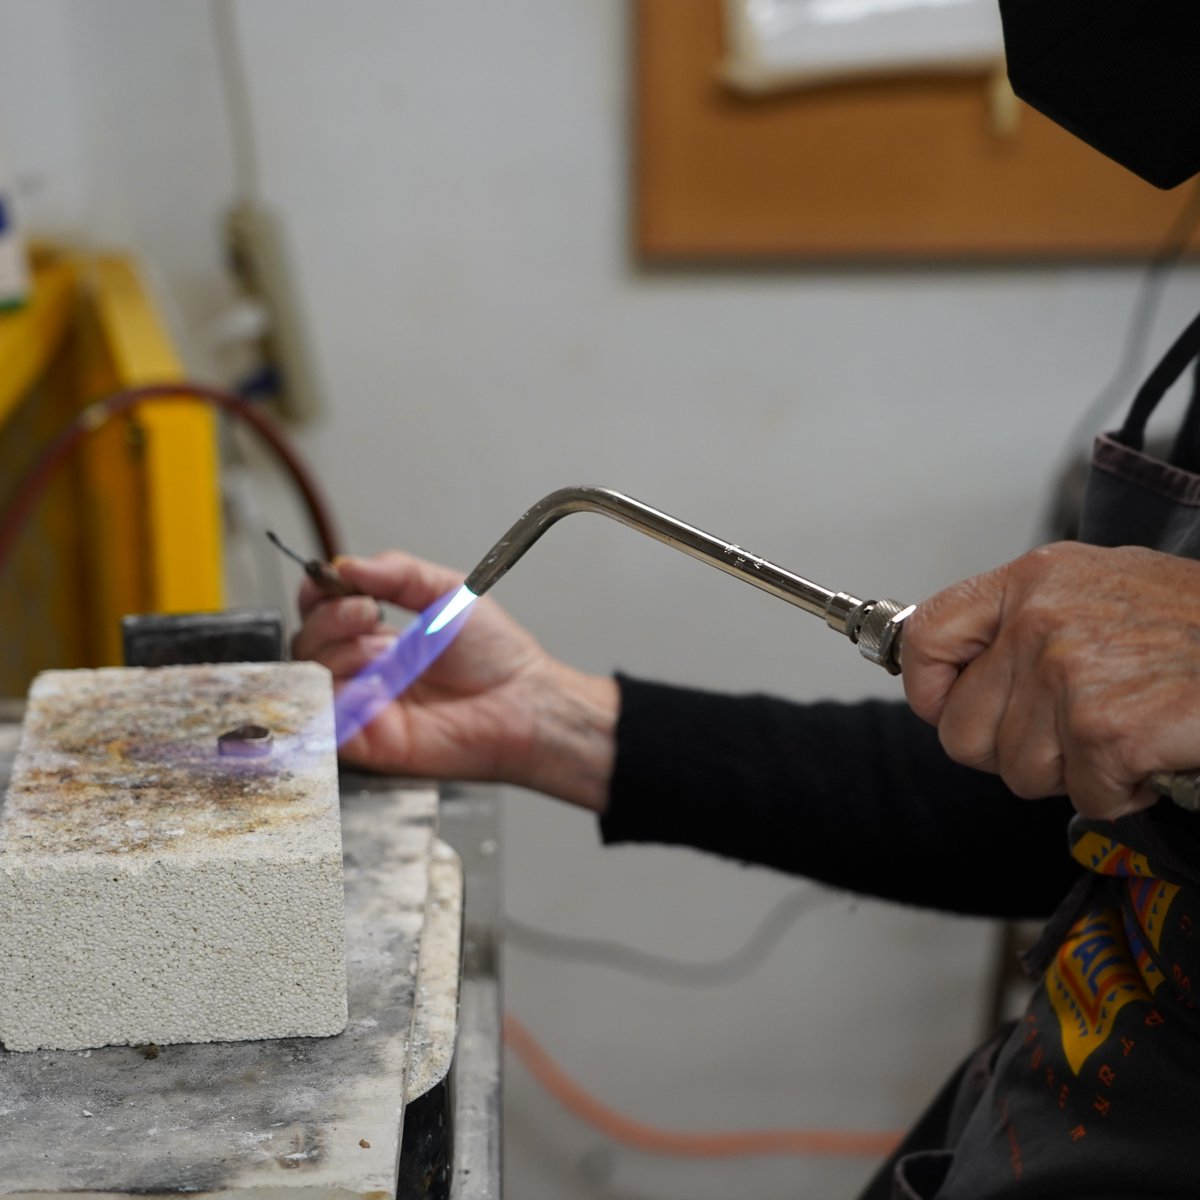 New August workshop! Wax and Fire is a three-day jewelry workshop with Maureen Duffy focusing on the methods of relief carving and casting that she uses in her own artistic practice as a professional jeweler. Learn more: reg137.imperisoft.com/Fleisher/Progr…